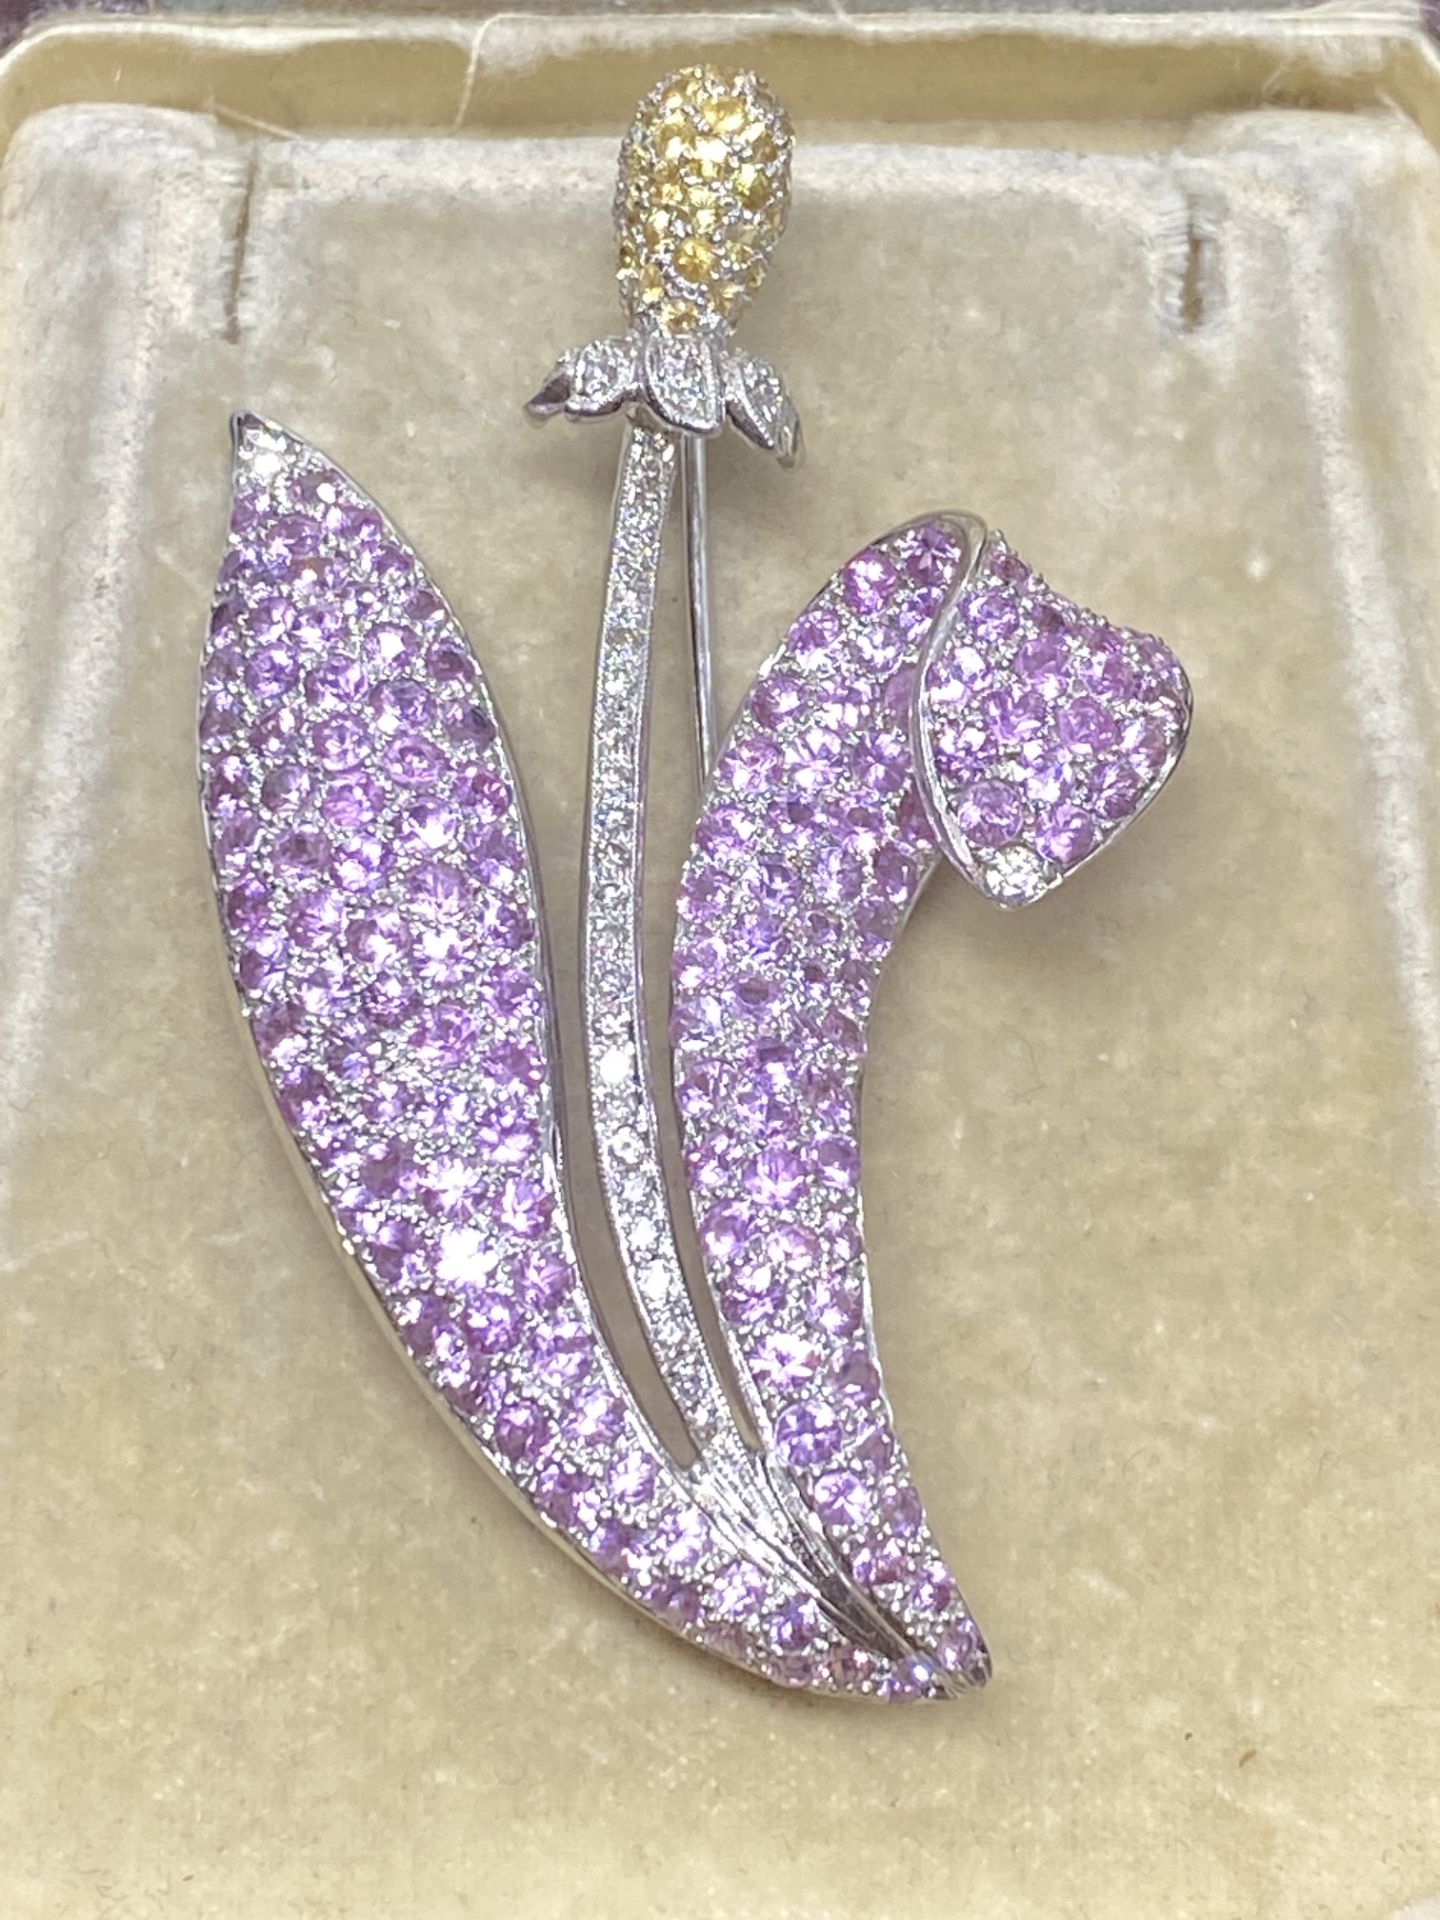 18ct WHITE GOLD PINK SAPPHIRE & DIAMOND FLOWER BROOCH - Image 2 of 6